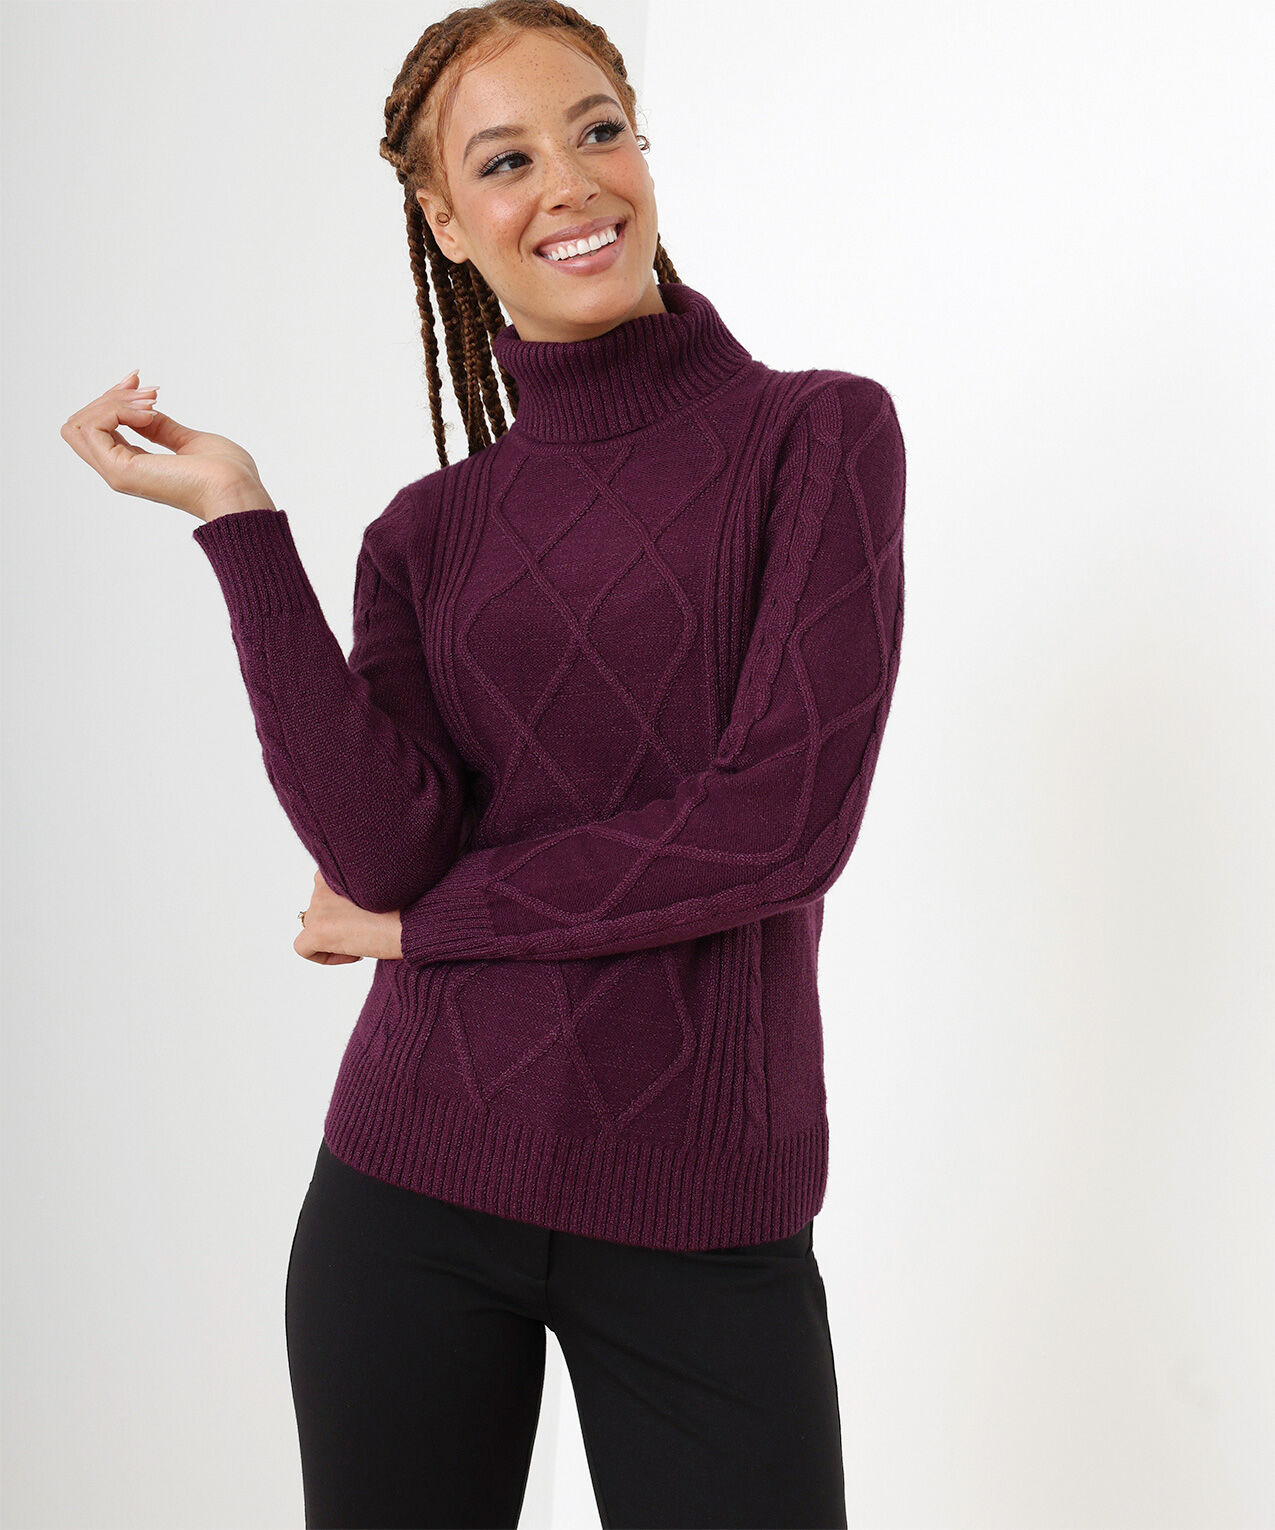 Shimmery Cable Knit Turtleneck Sweater